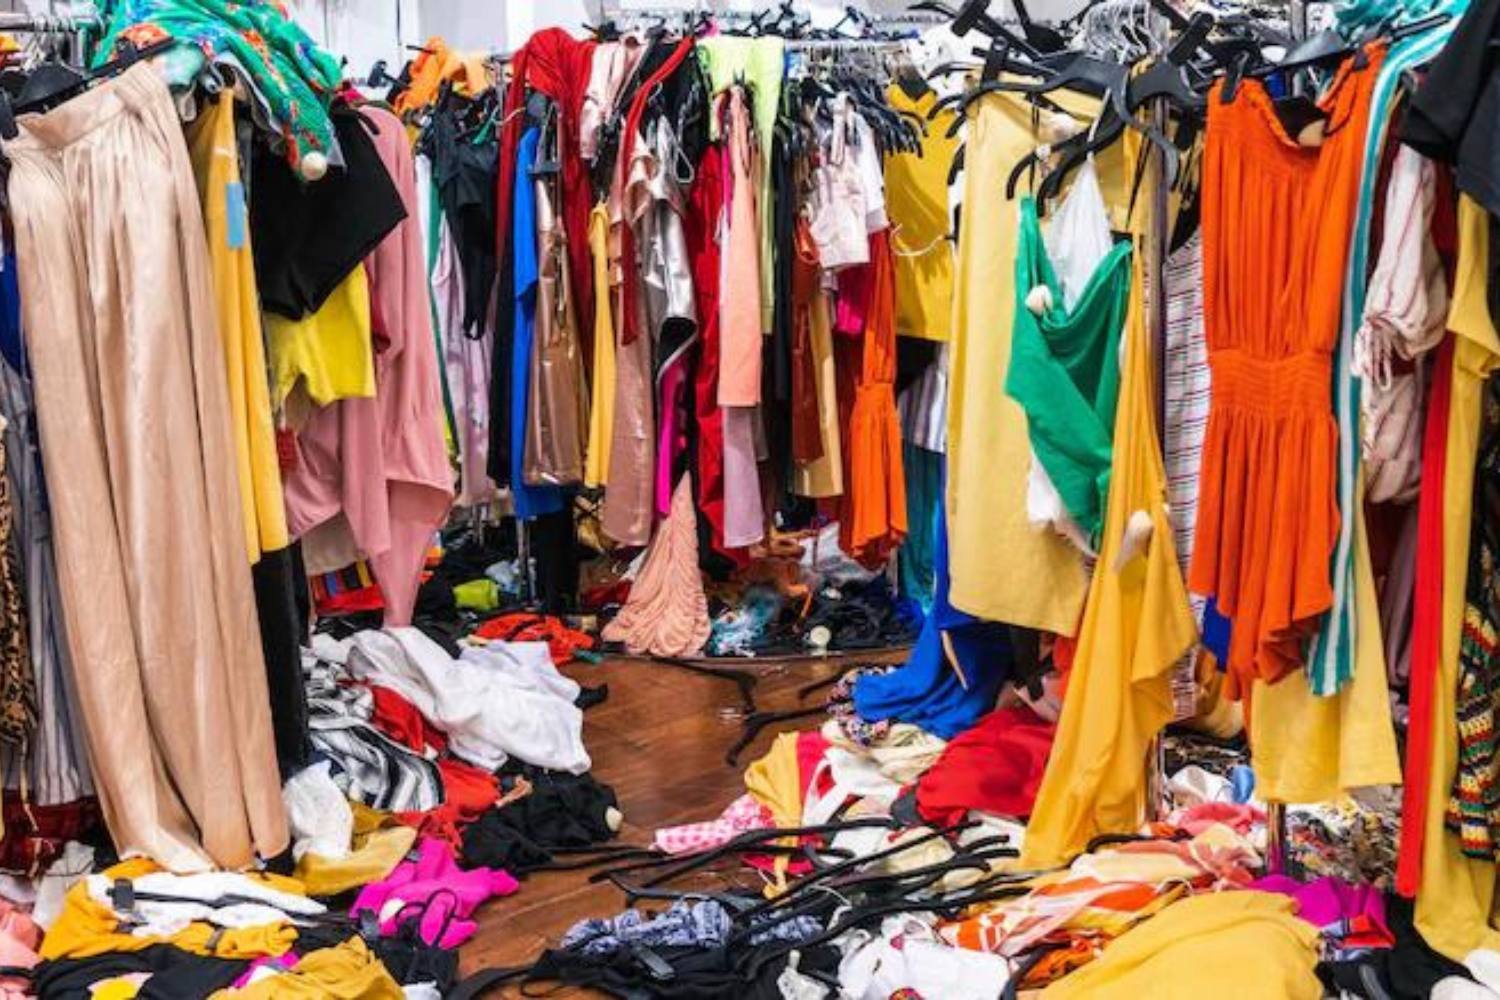 racks of colorful clothing, some fallen as a messy pile on the floor